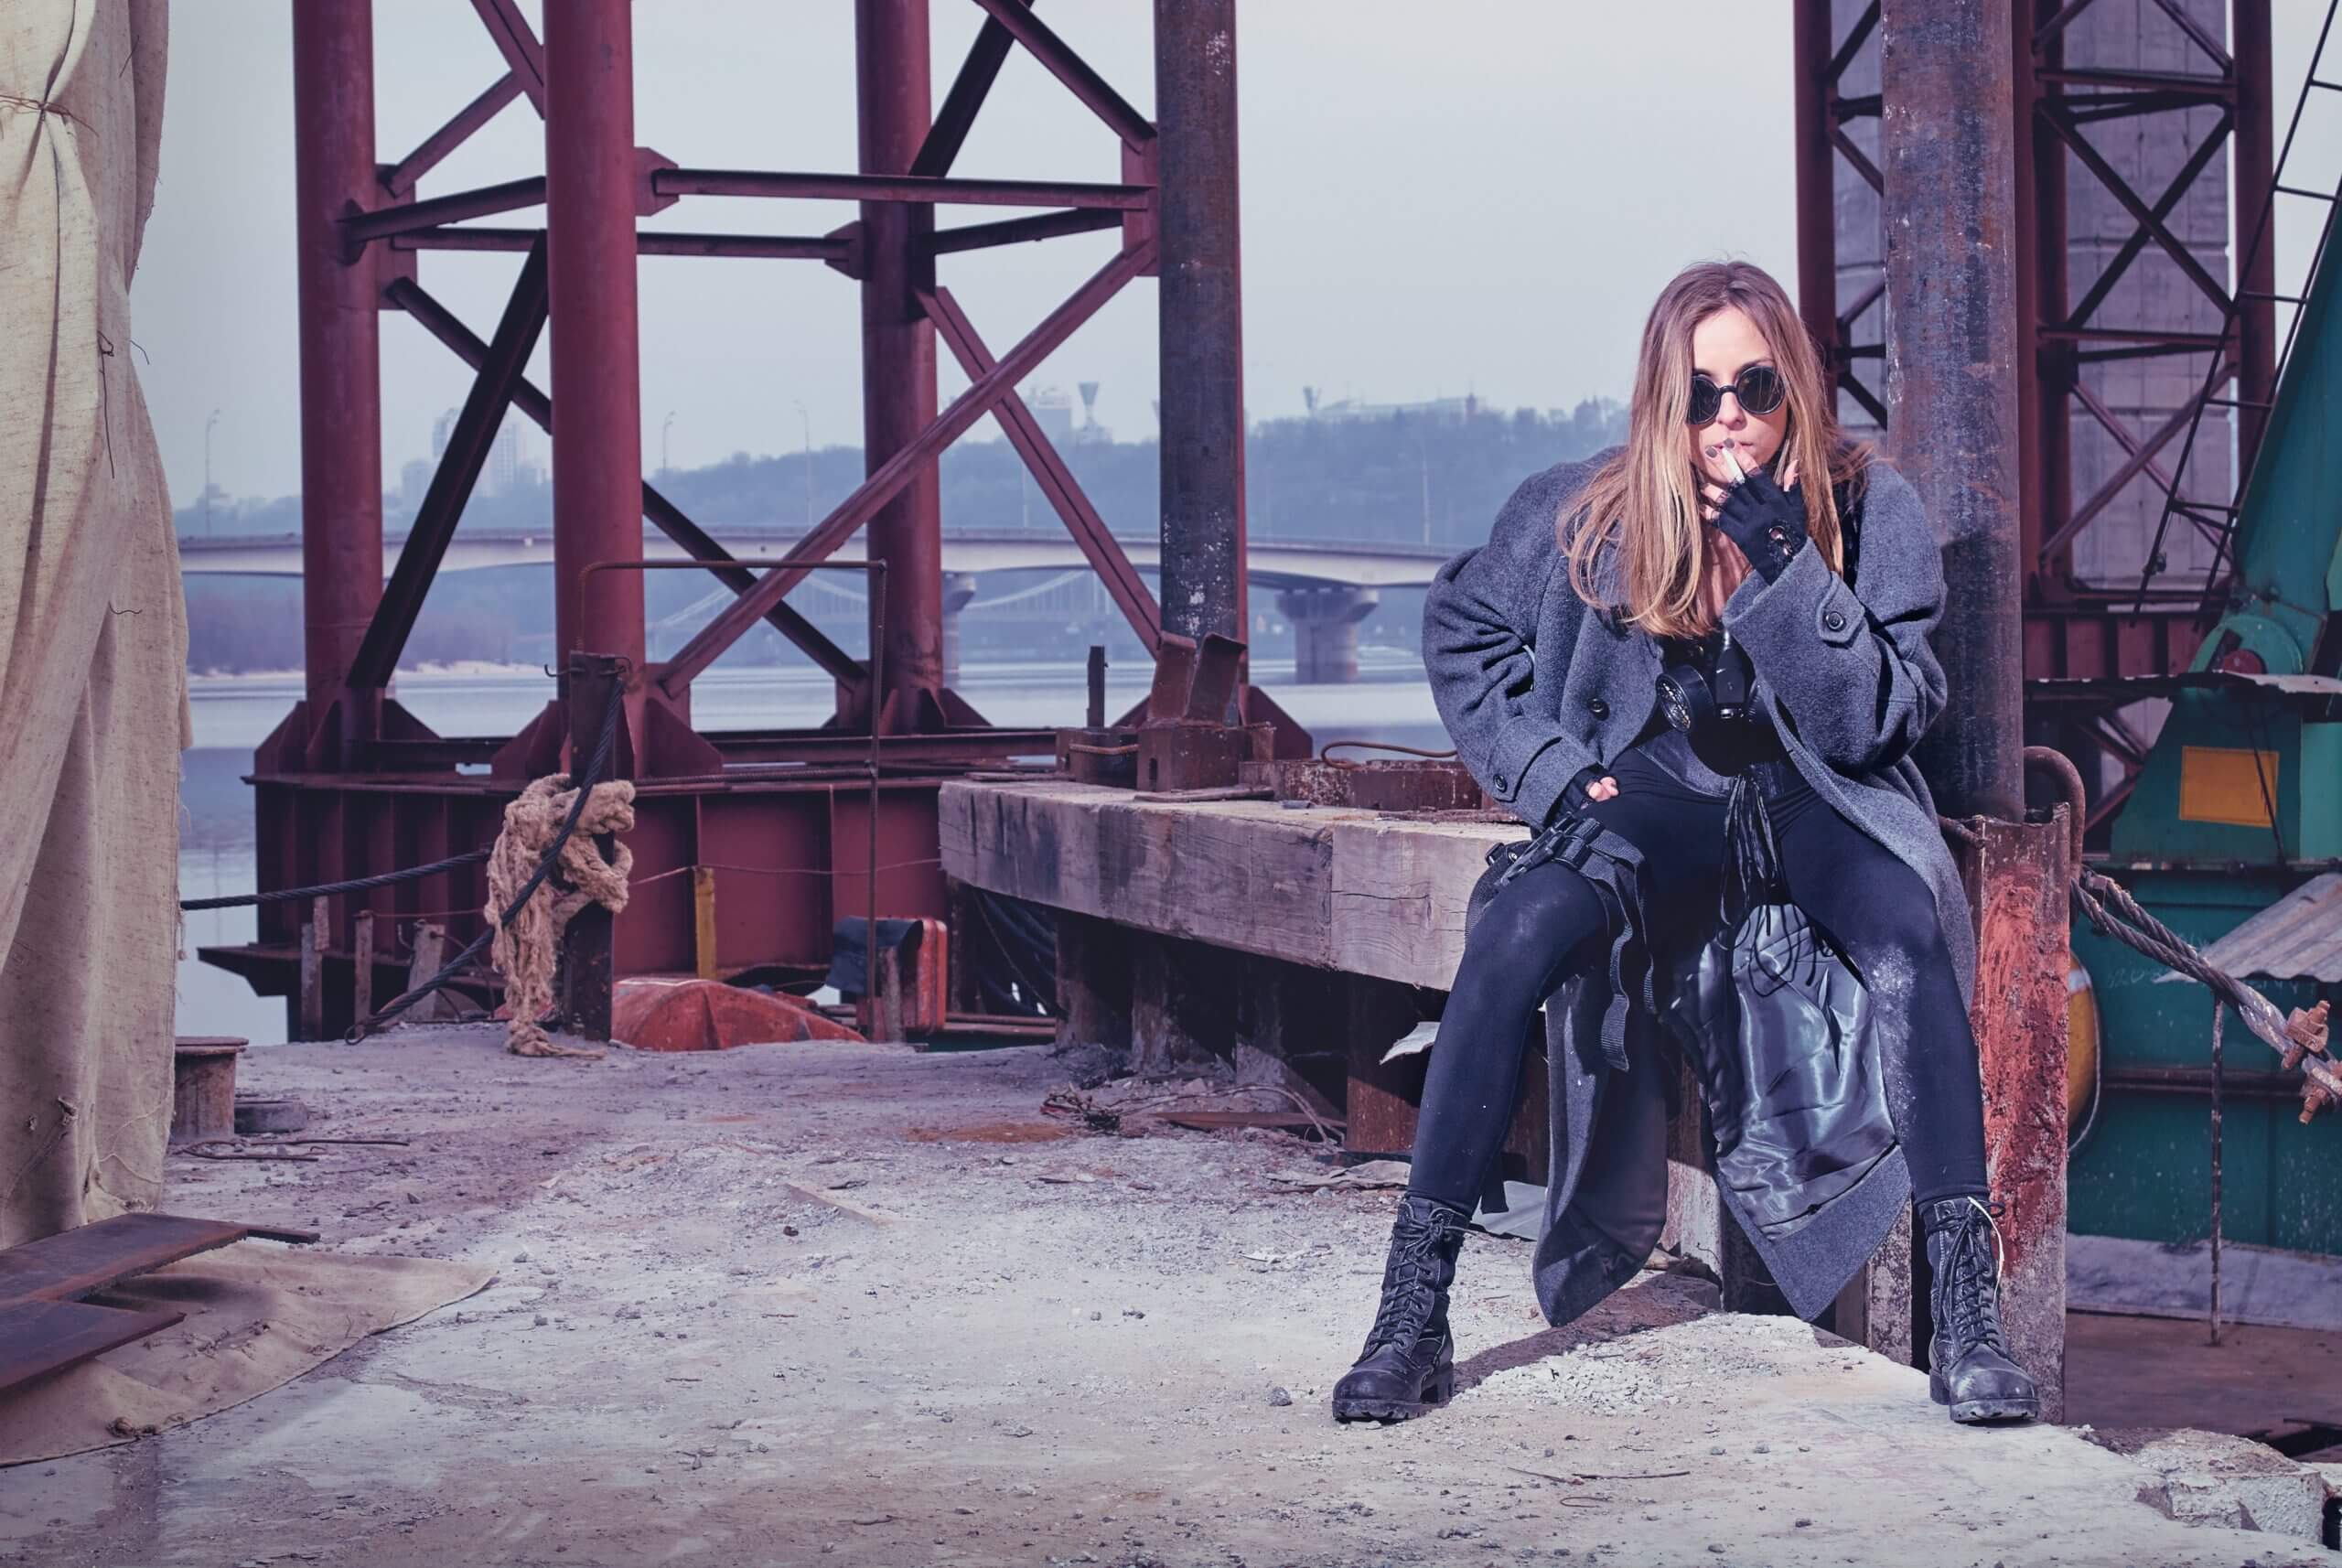 Woman in trench coat, dark clothing and sunglasses waiting for someone under a bridge